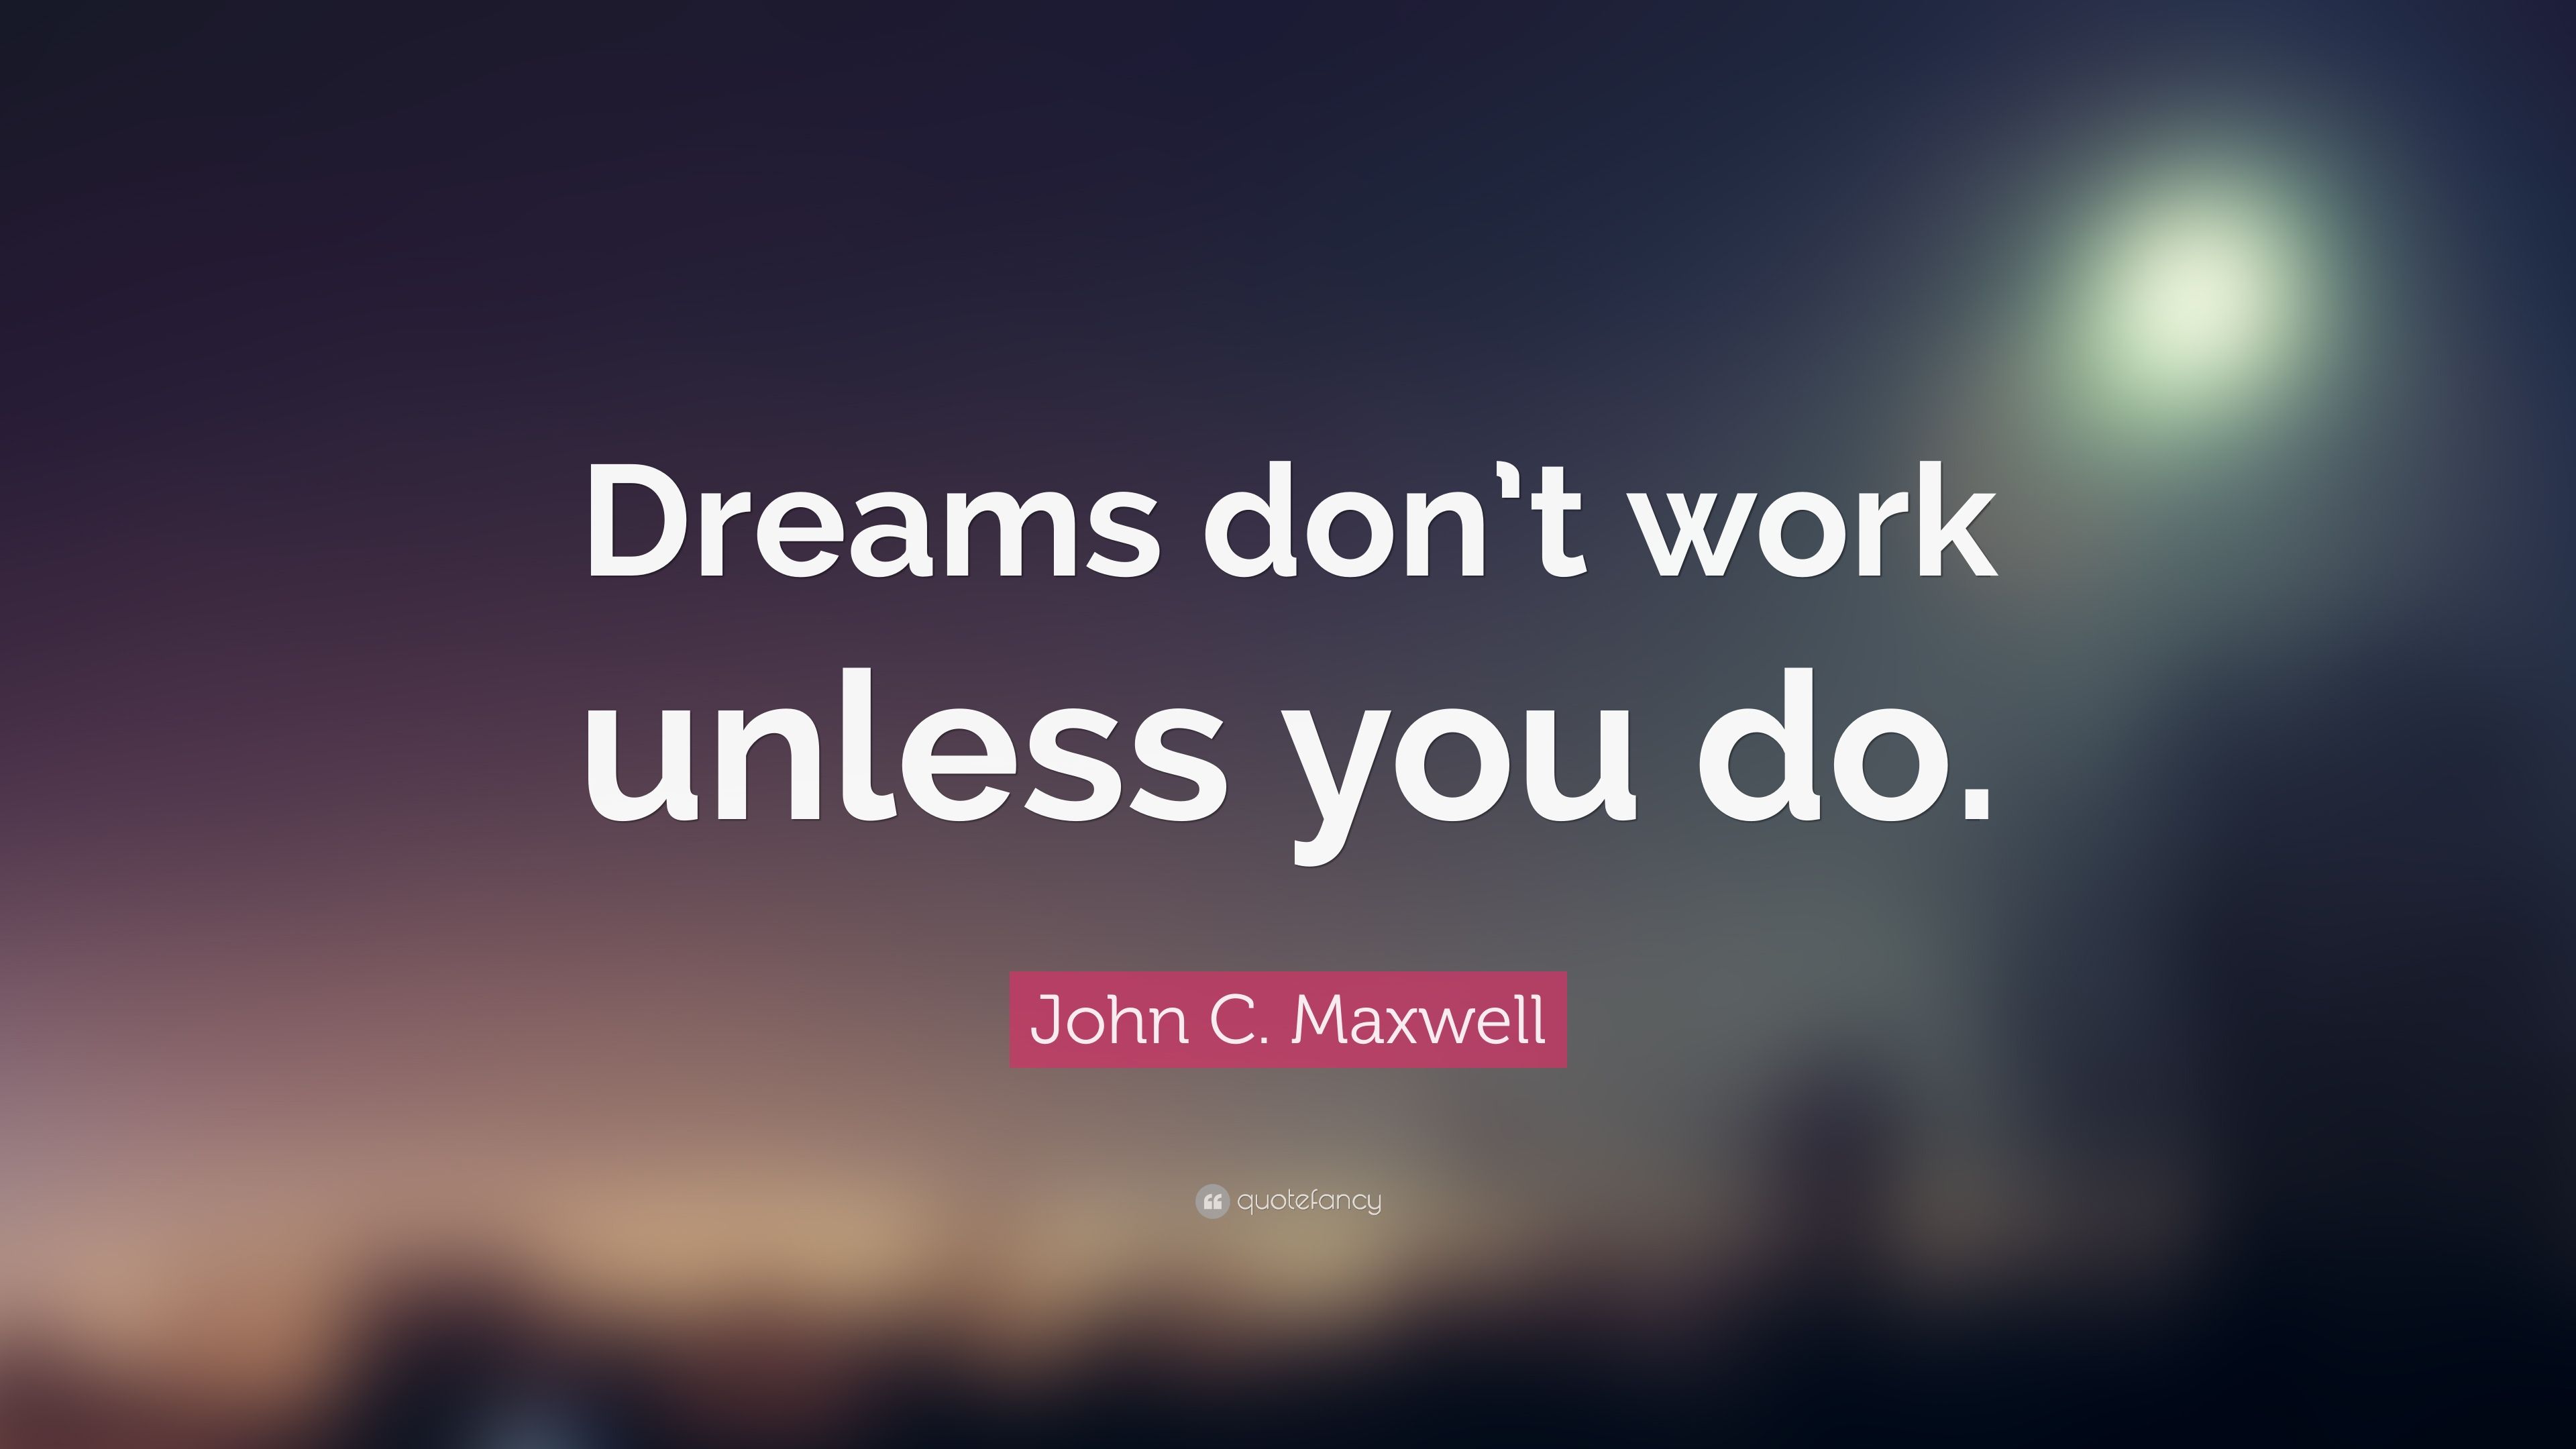 John C. Maxwell Quote: “Dreams don't work unless you do.” (35 wallpaper)